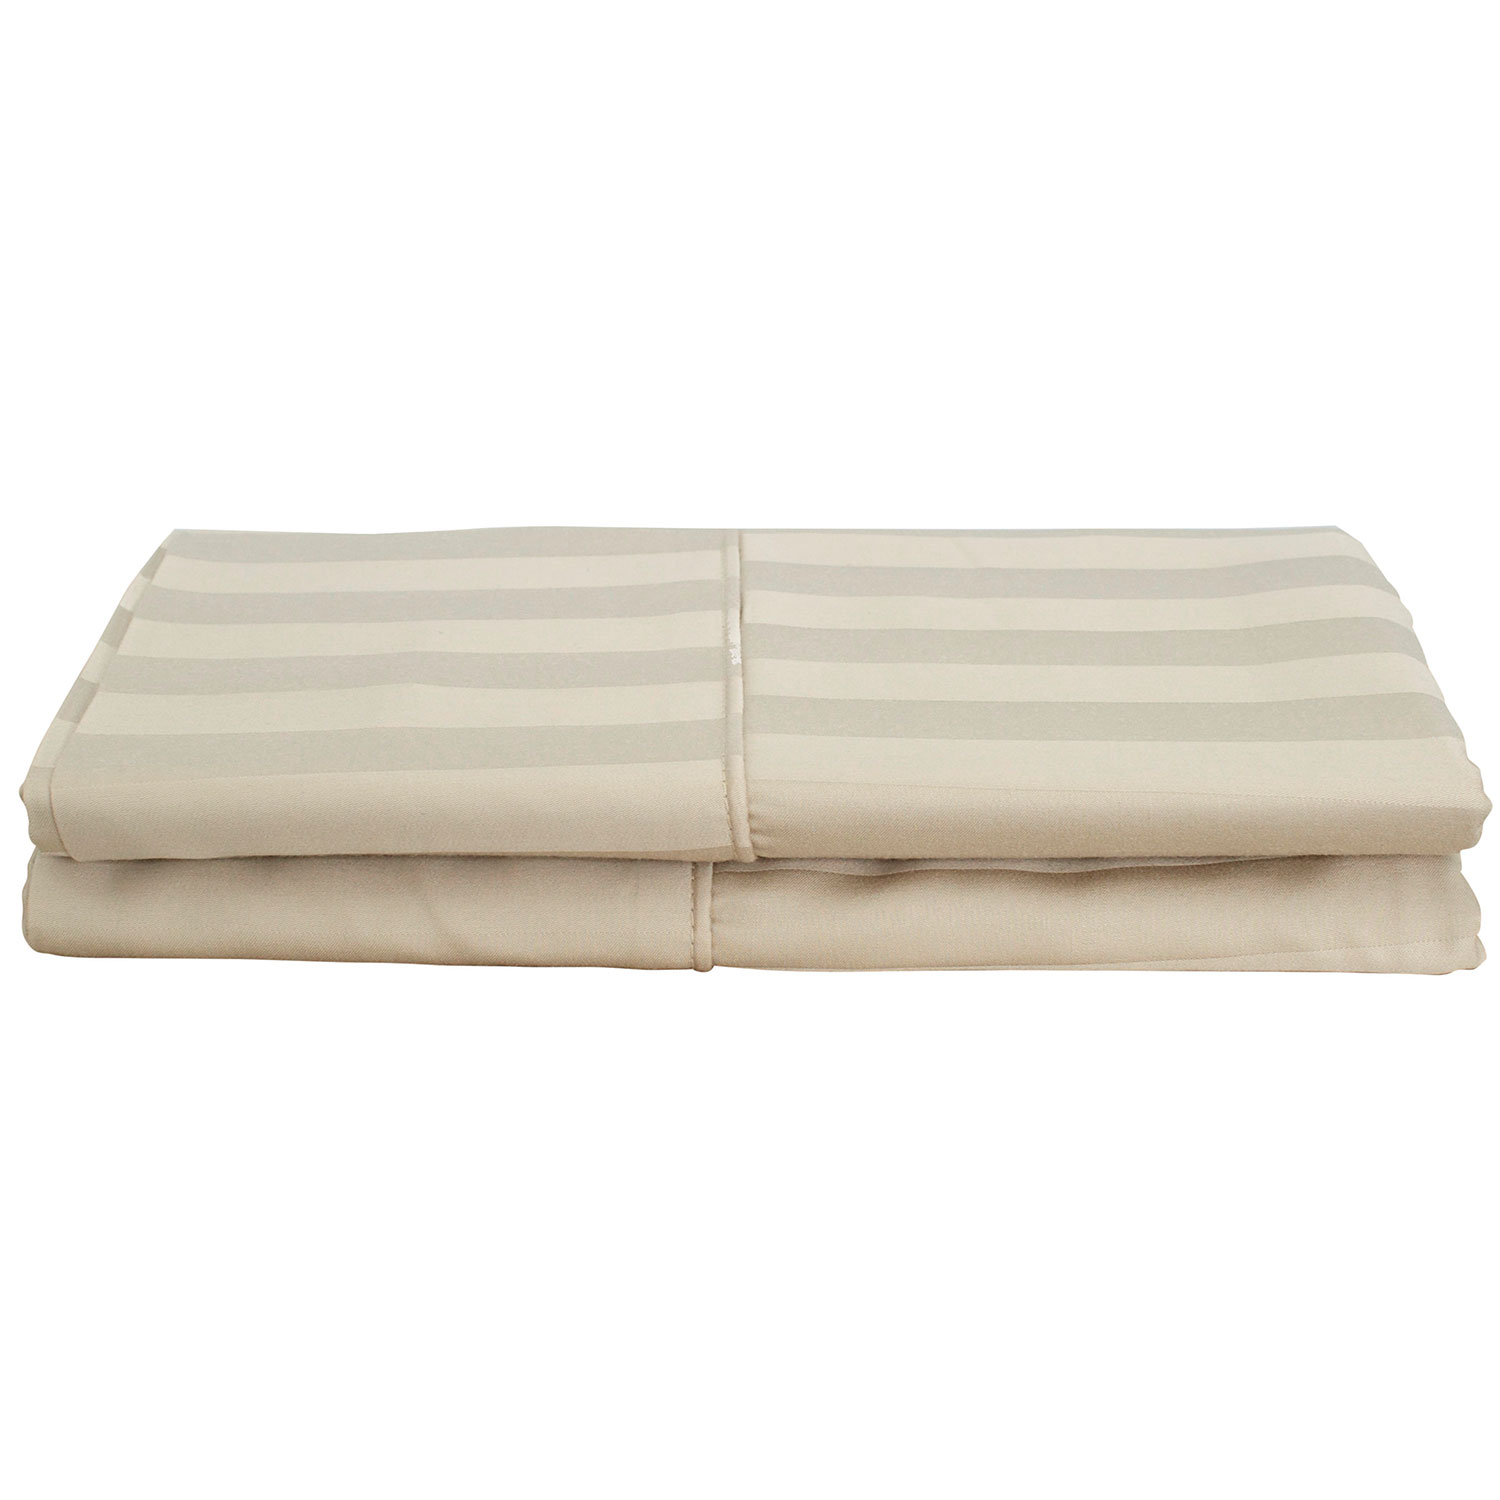 Maholi Damask Stripe Collection 310 Thread Count Rayon Pillow Case - 2 Pack - King - Taupe